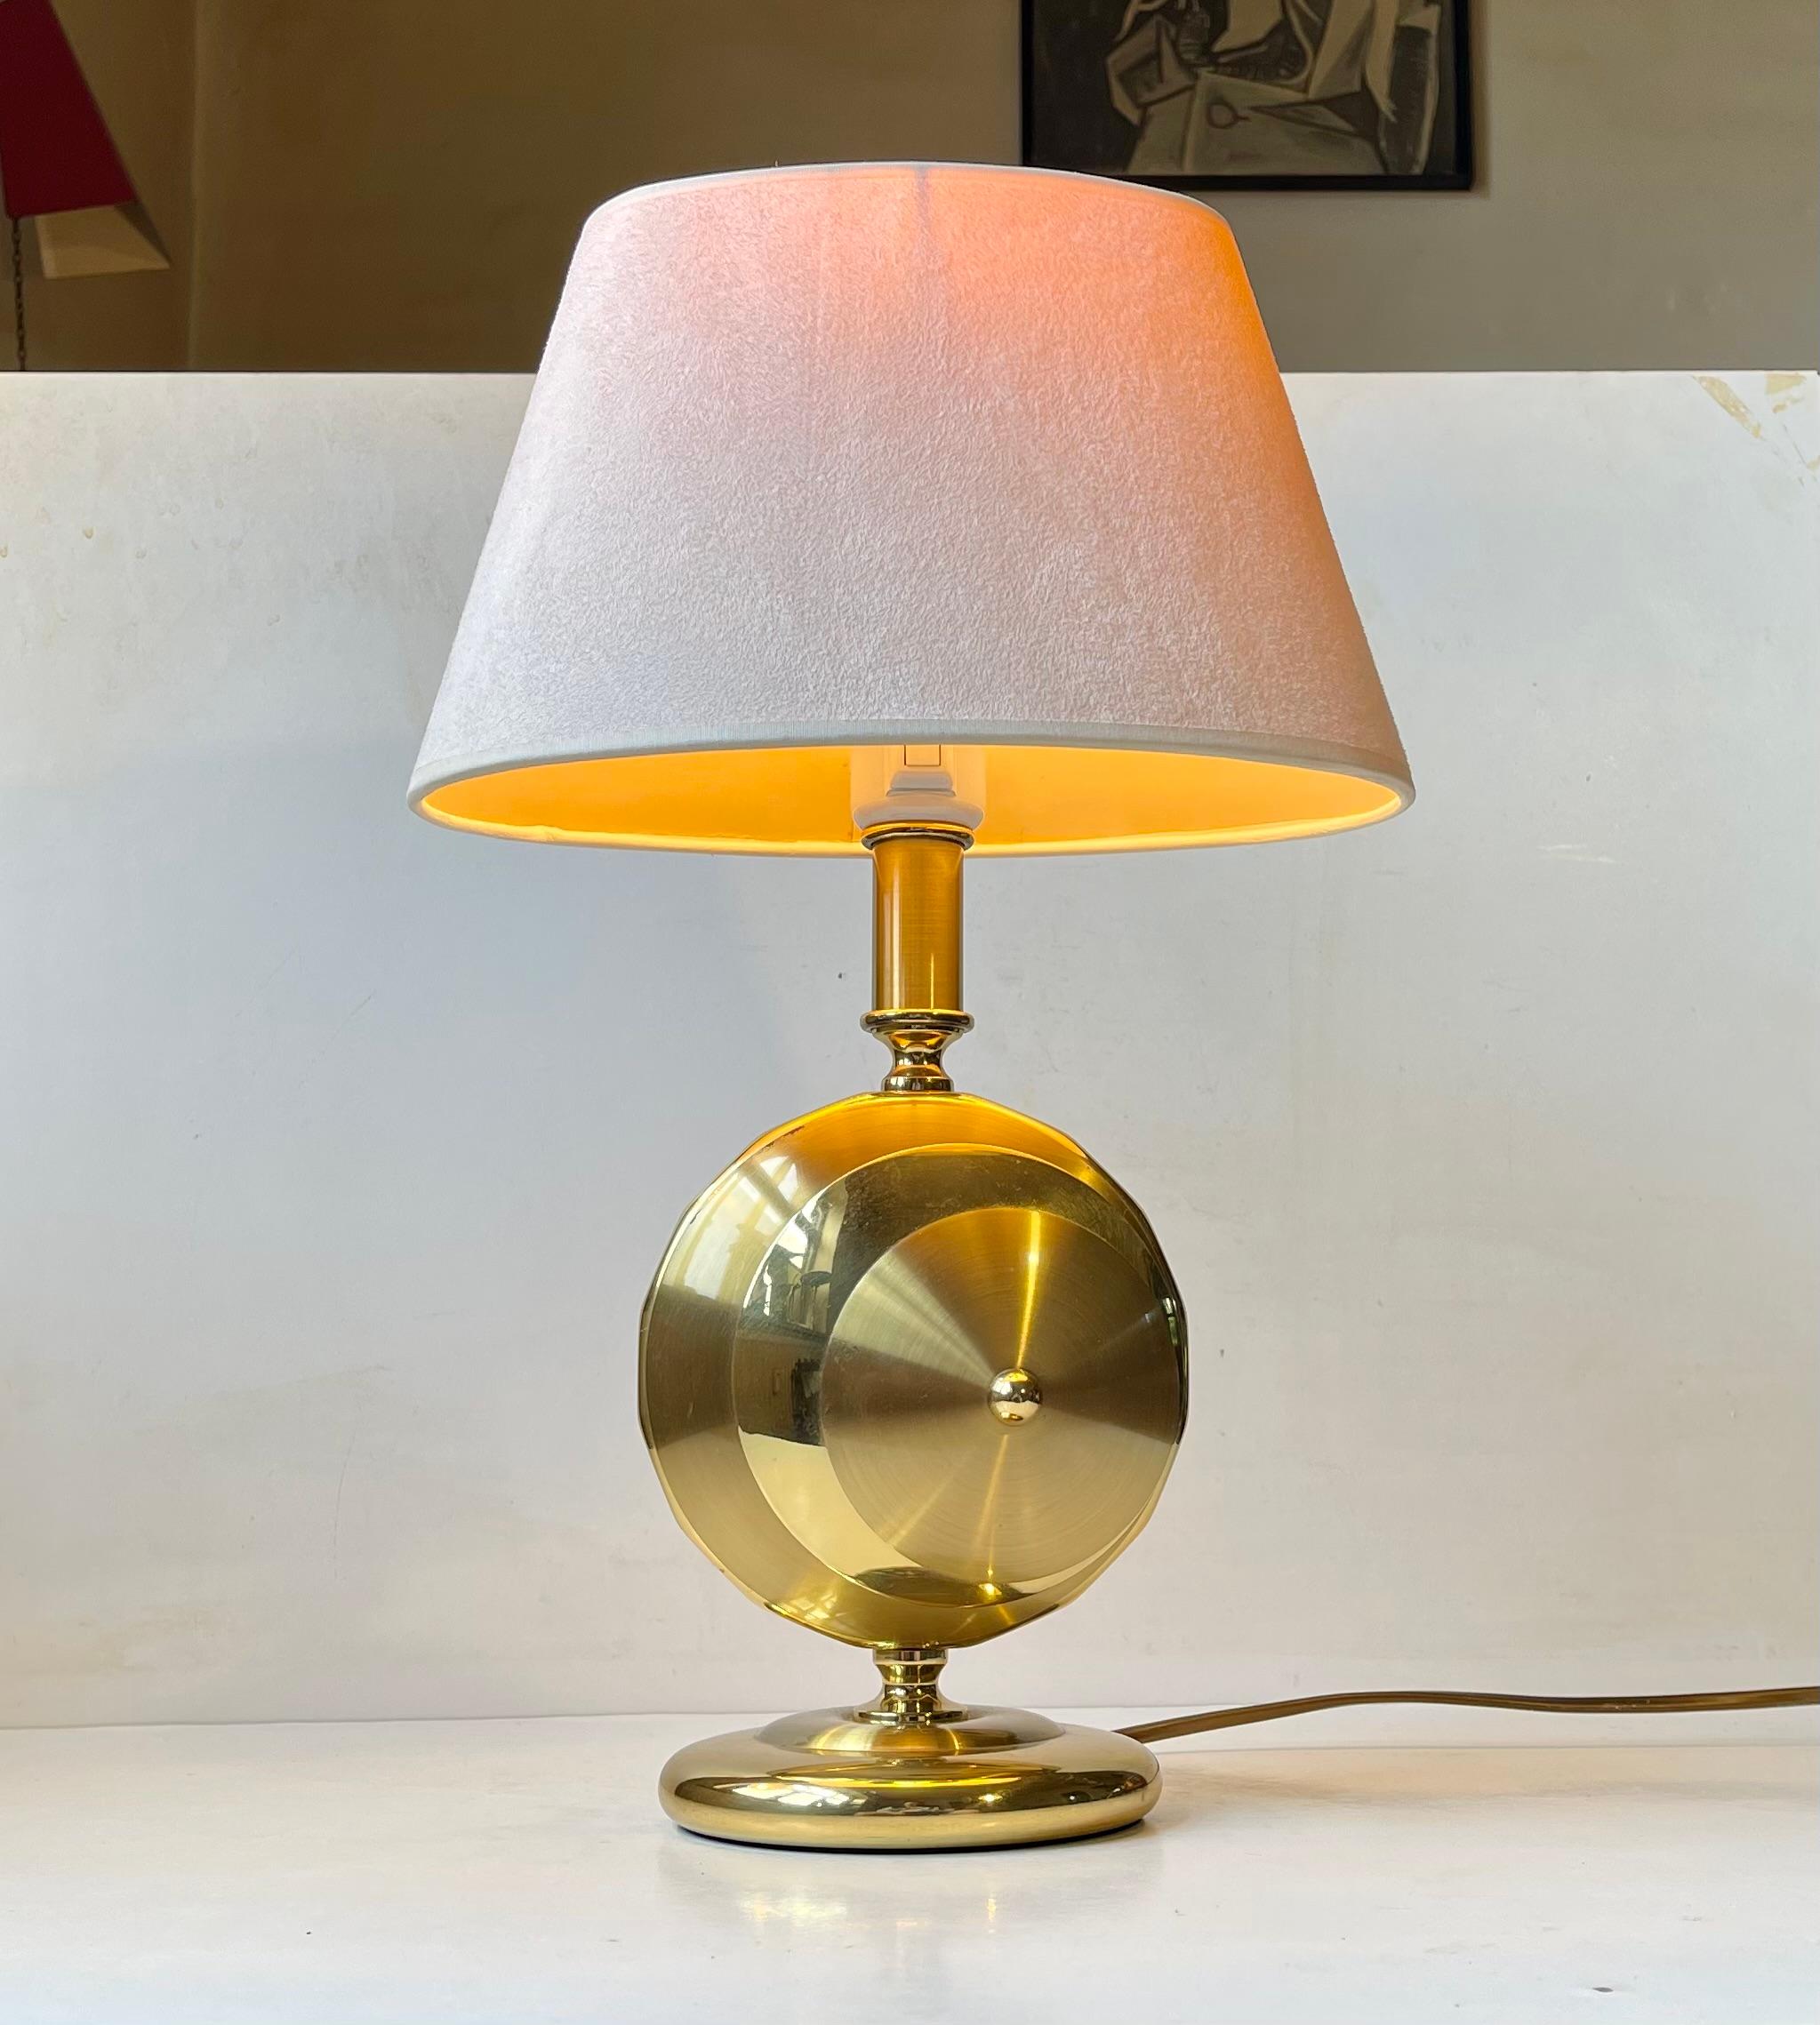 Art Deco Revival Mantle Table Lamp in Brass by TS Belysning, 1980s In Good Condition For Sale In Esbjerg, DK